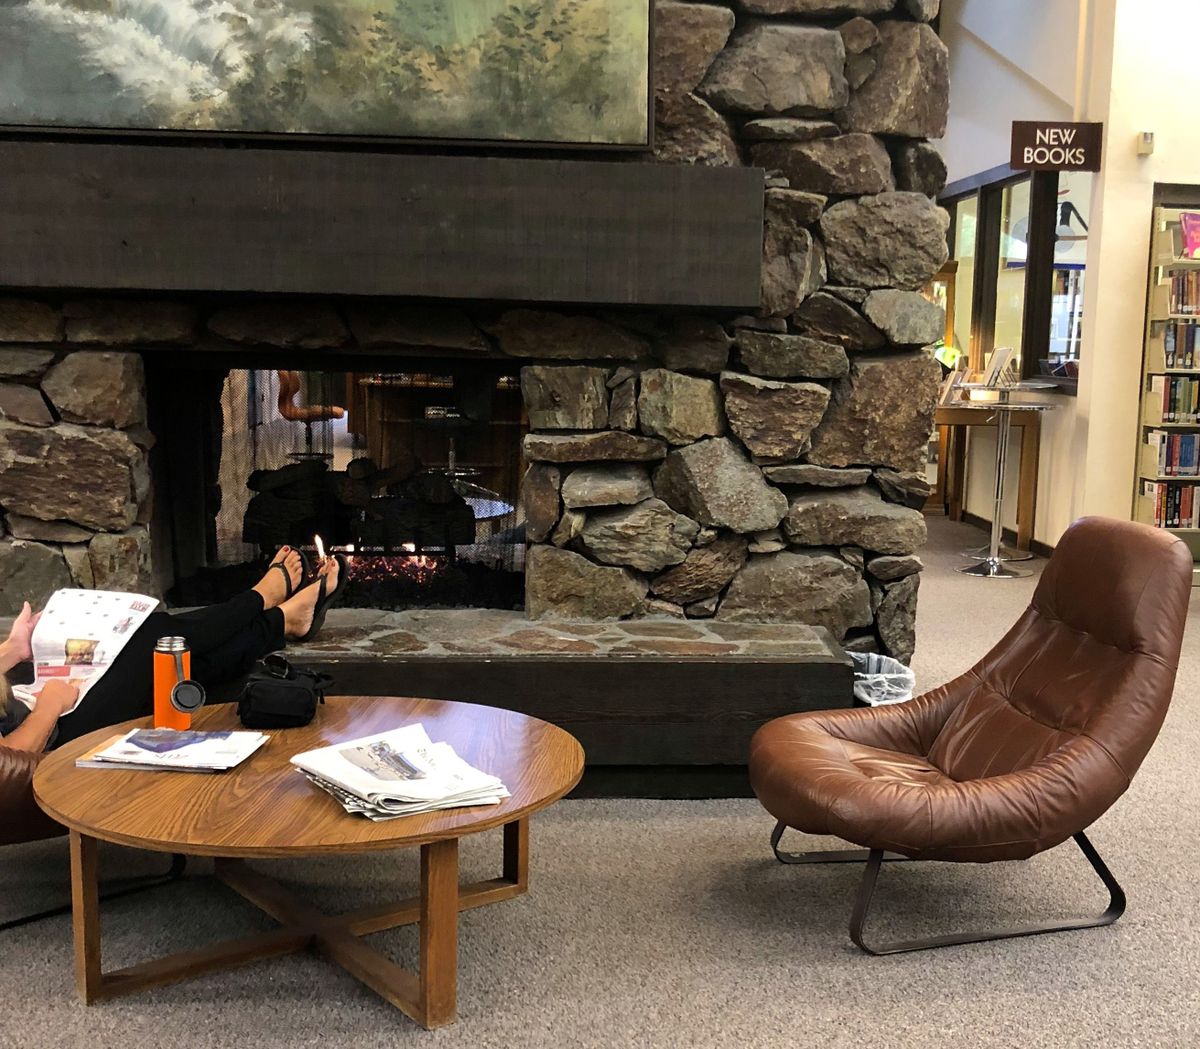 The Ketchum, Idaho, library has a beautiful fireplace and offers musical instruments for borrow.   (Leslie Kelly)